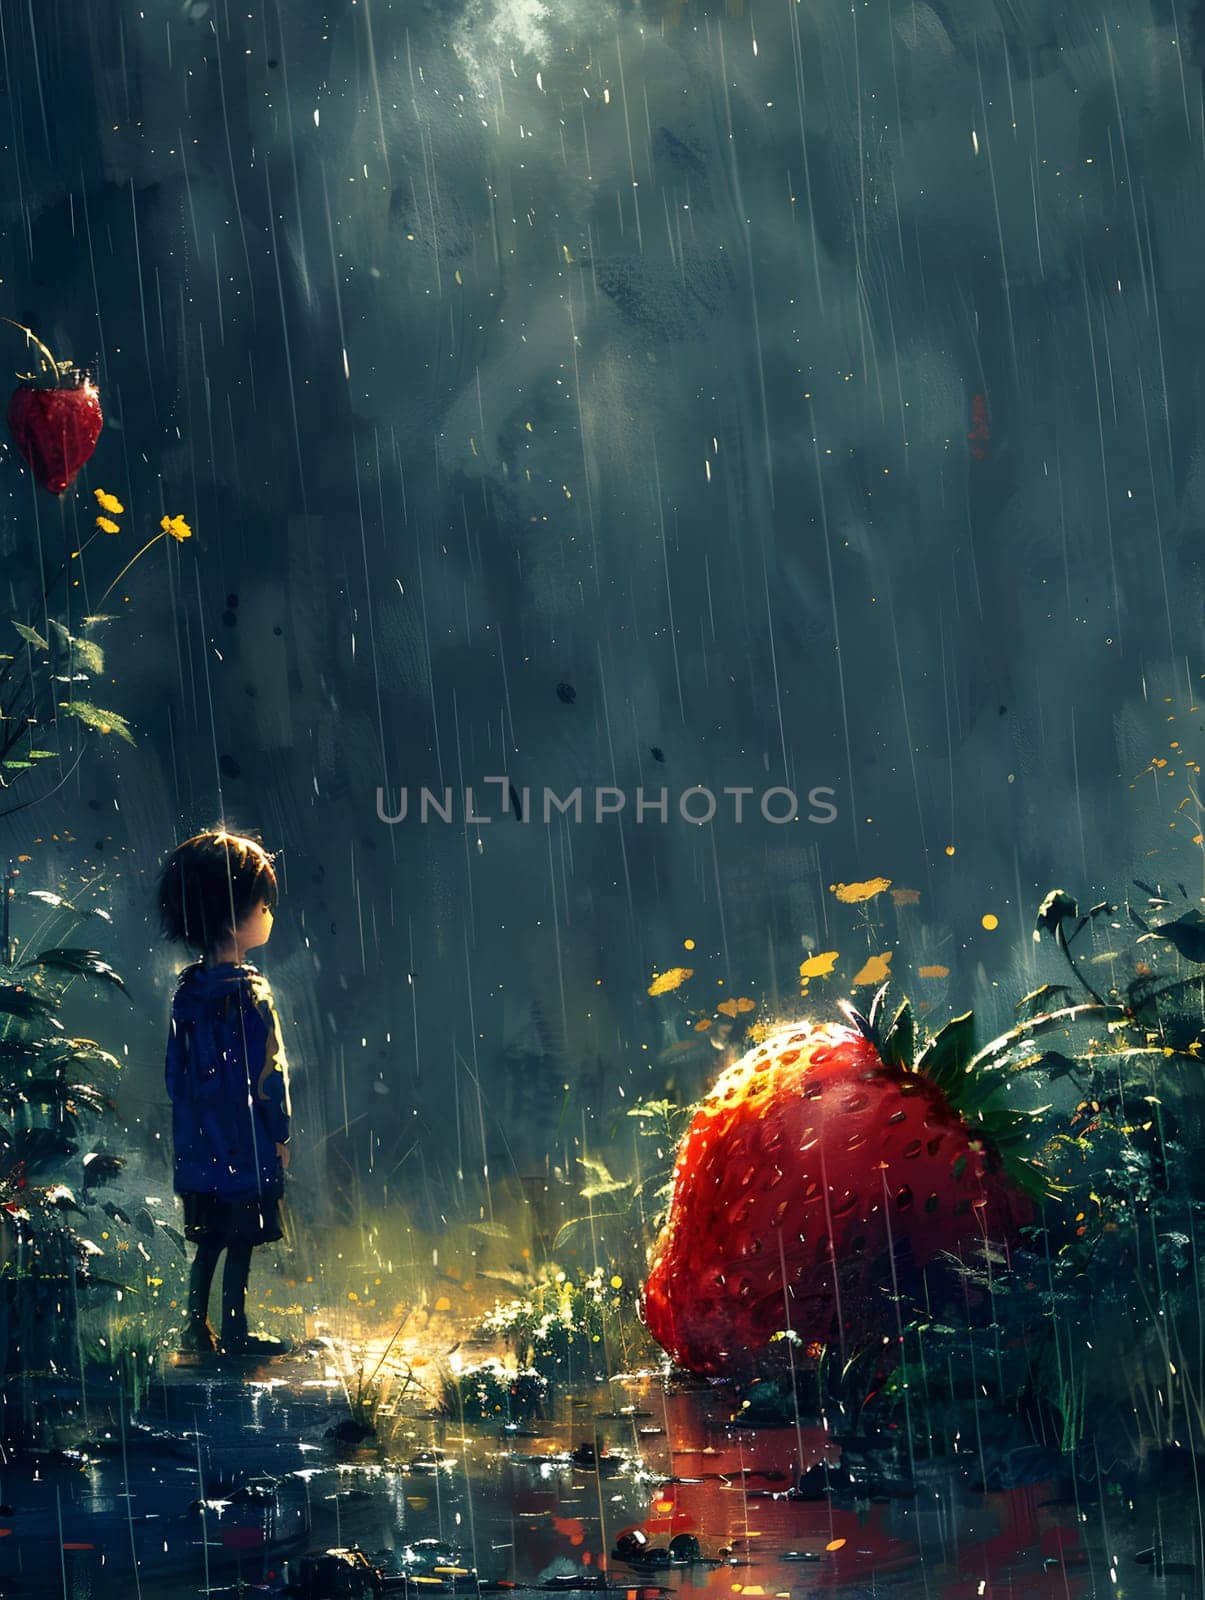 A little boy enjoys the rain next to a giant strawberry in a natural landscape by Nadtochiy